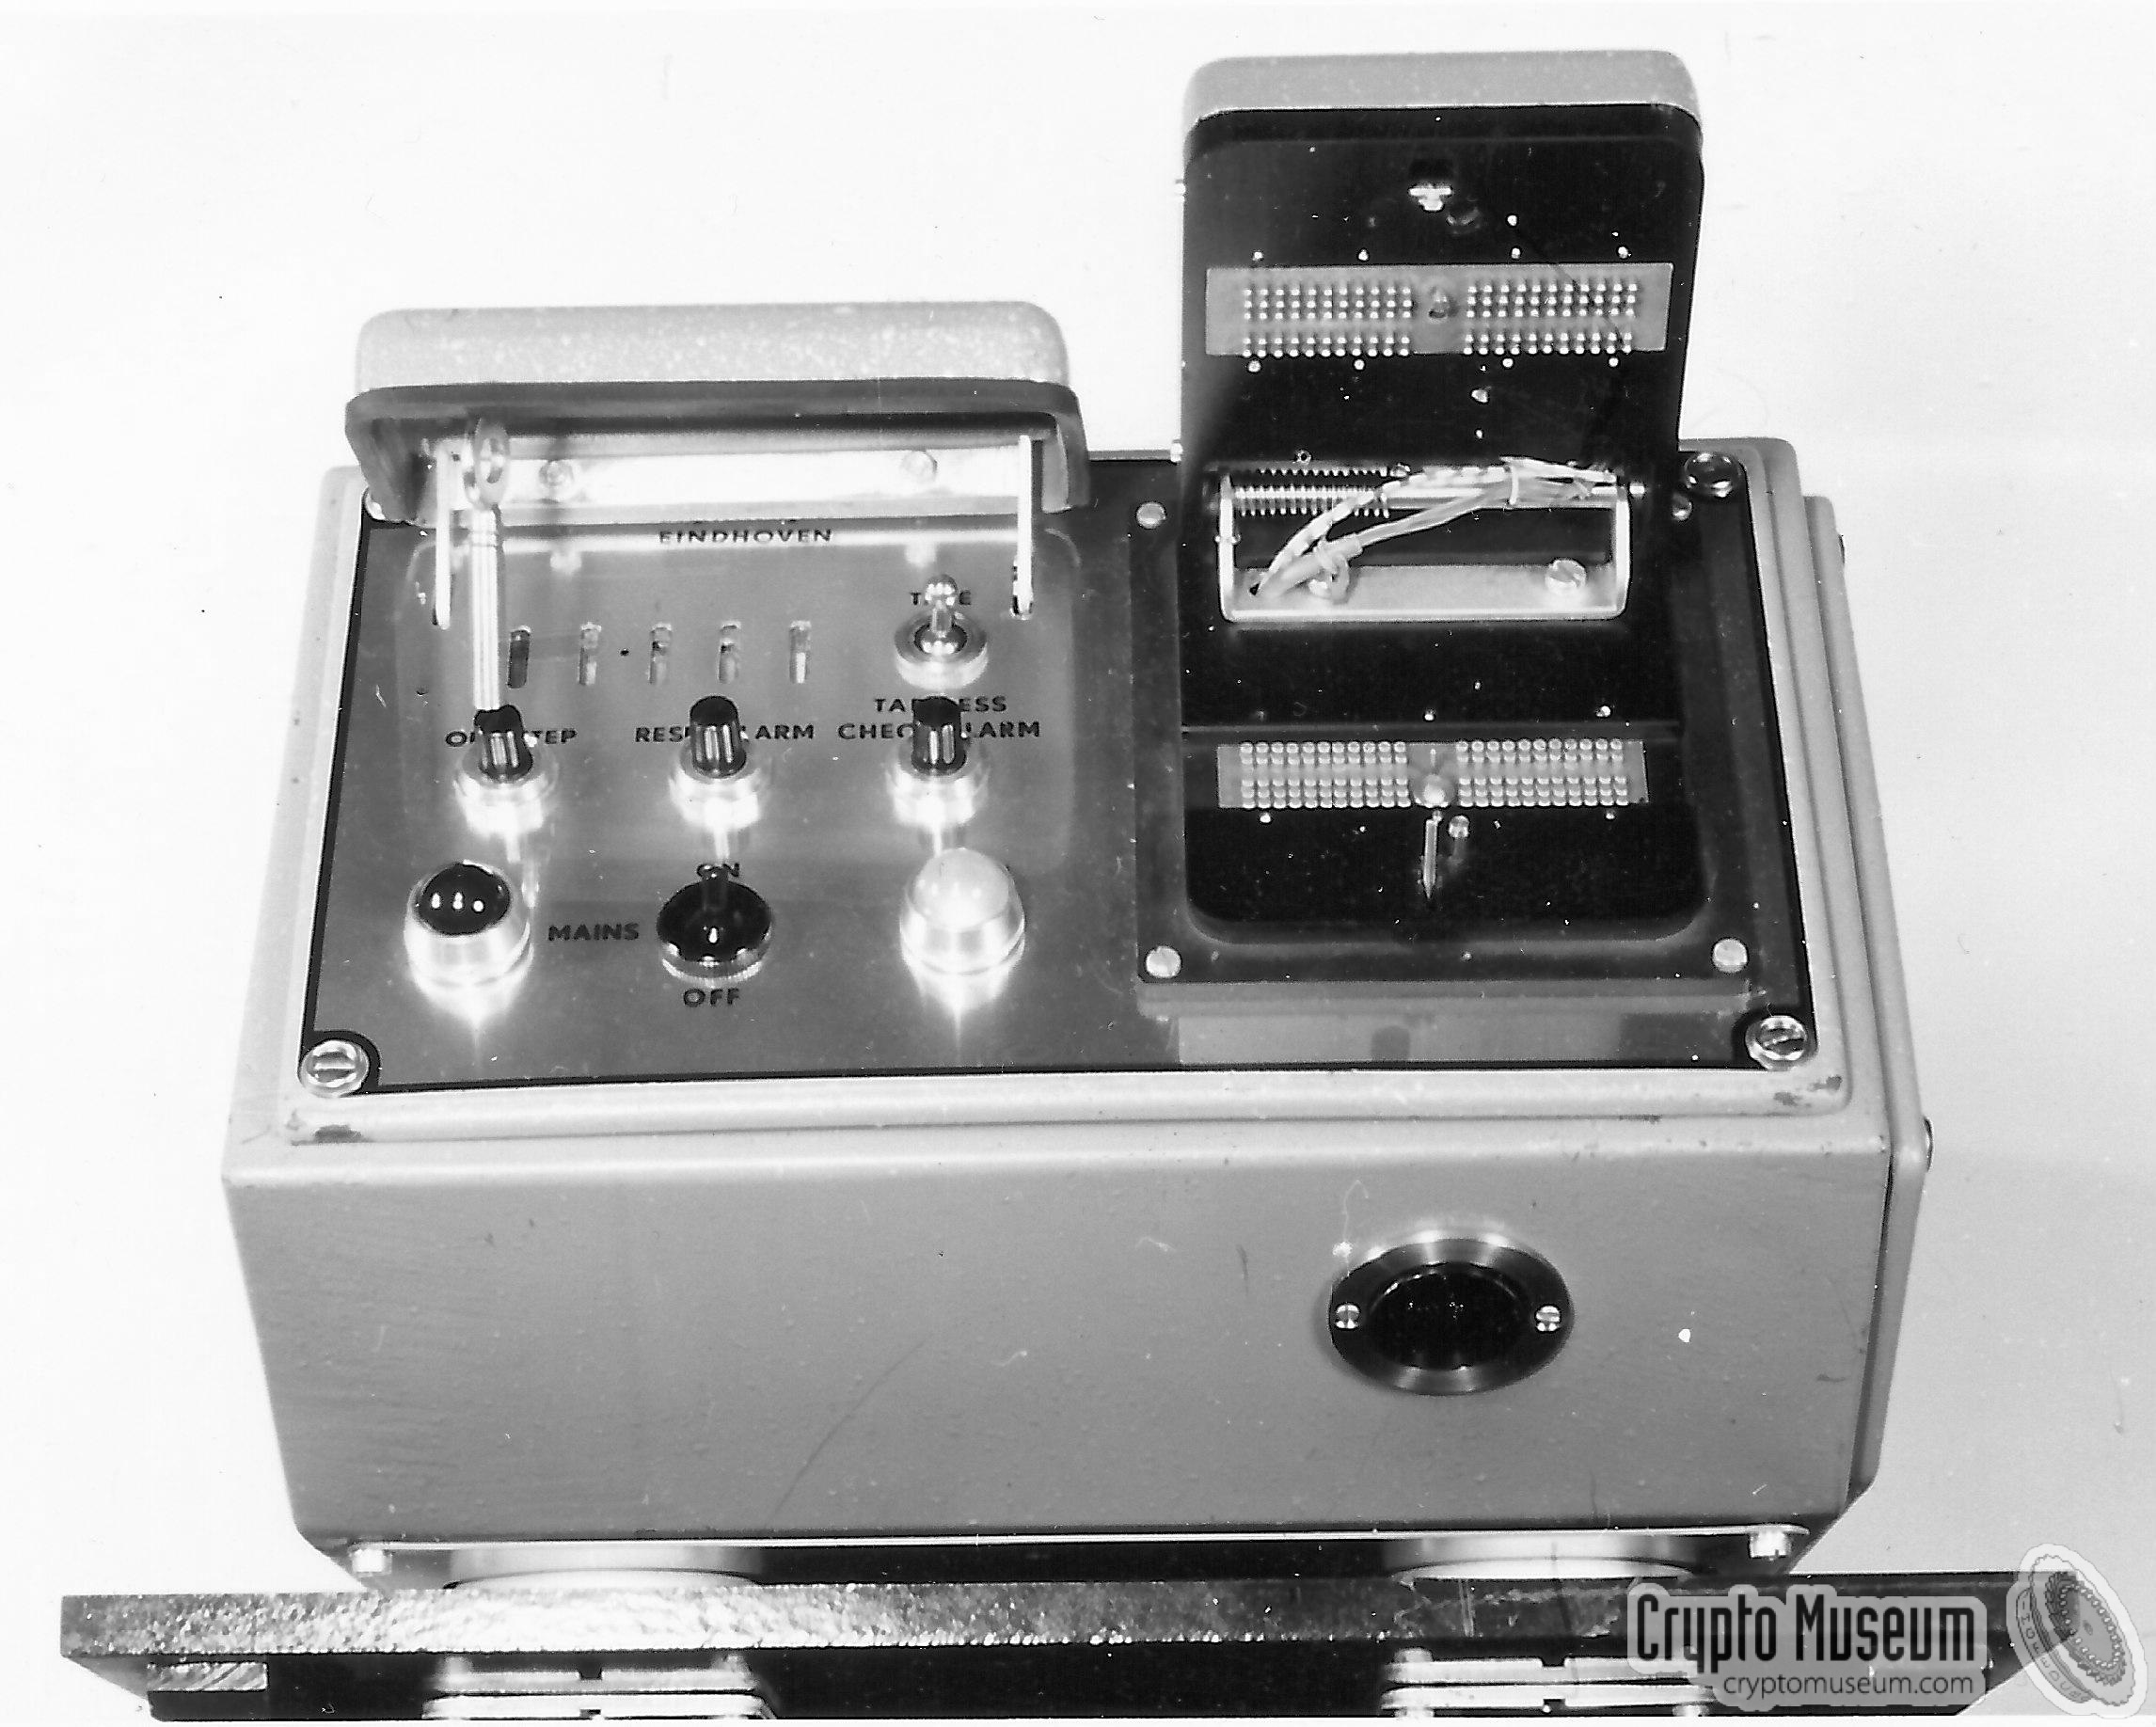 Early development version of the key tape reader